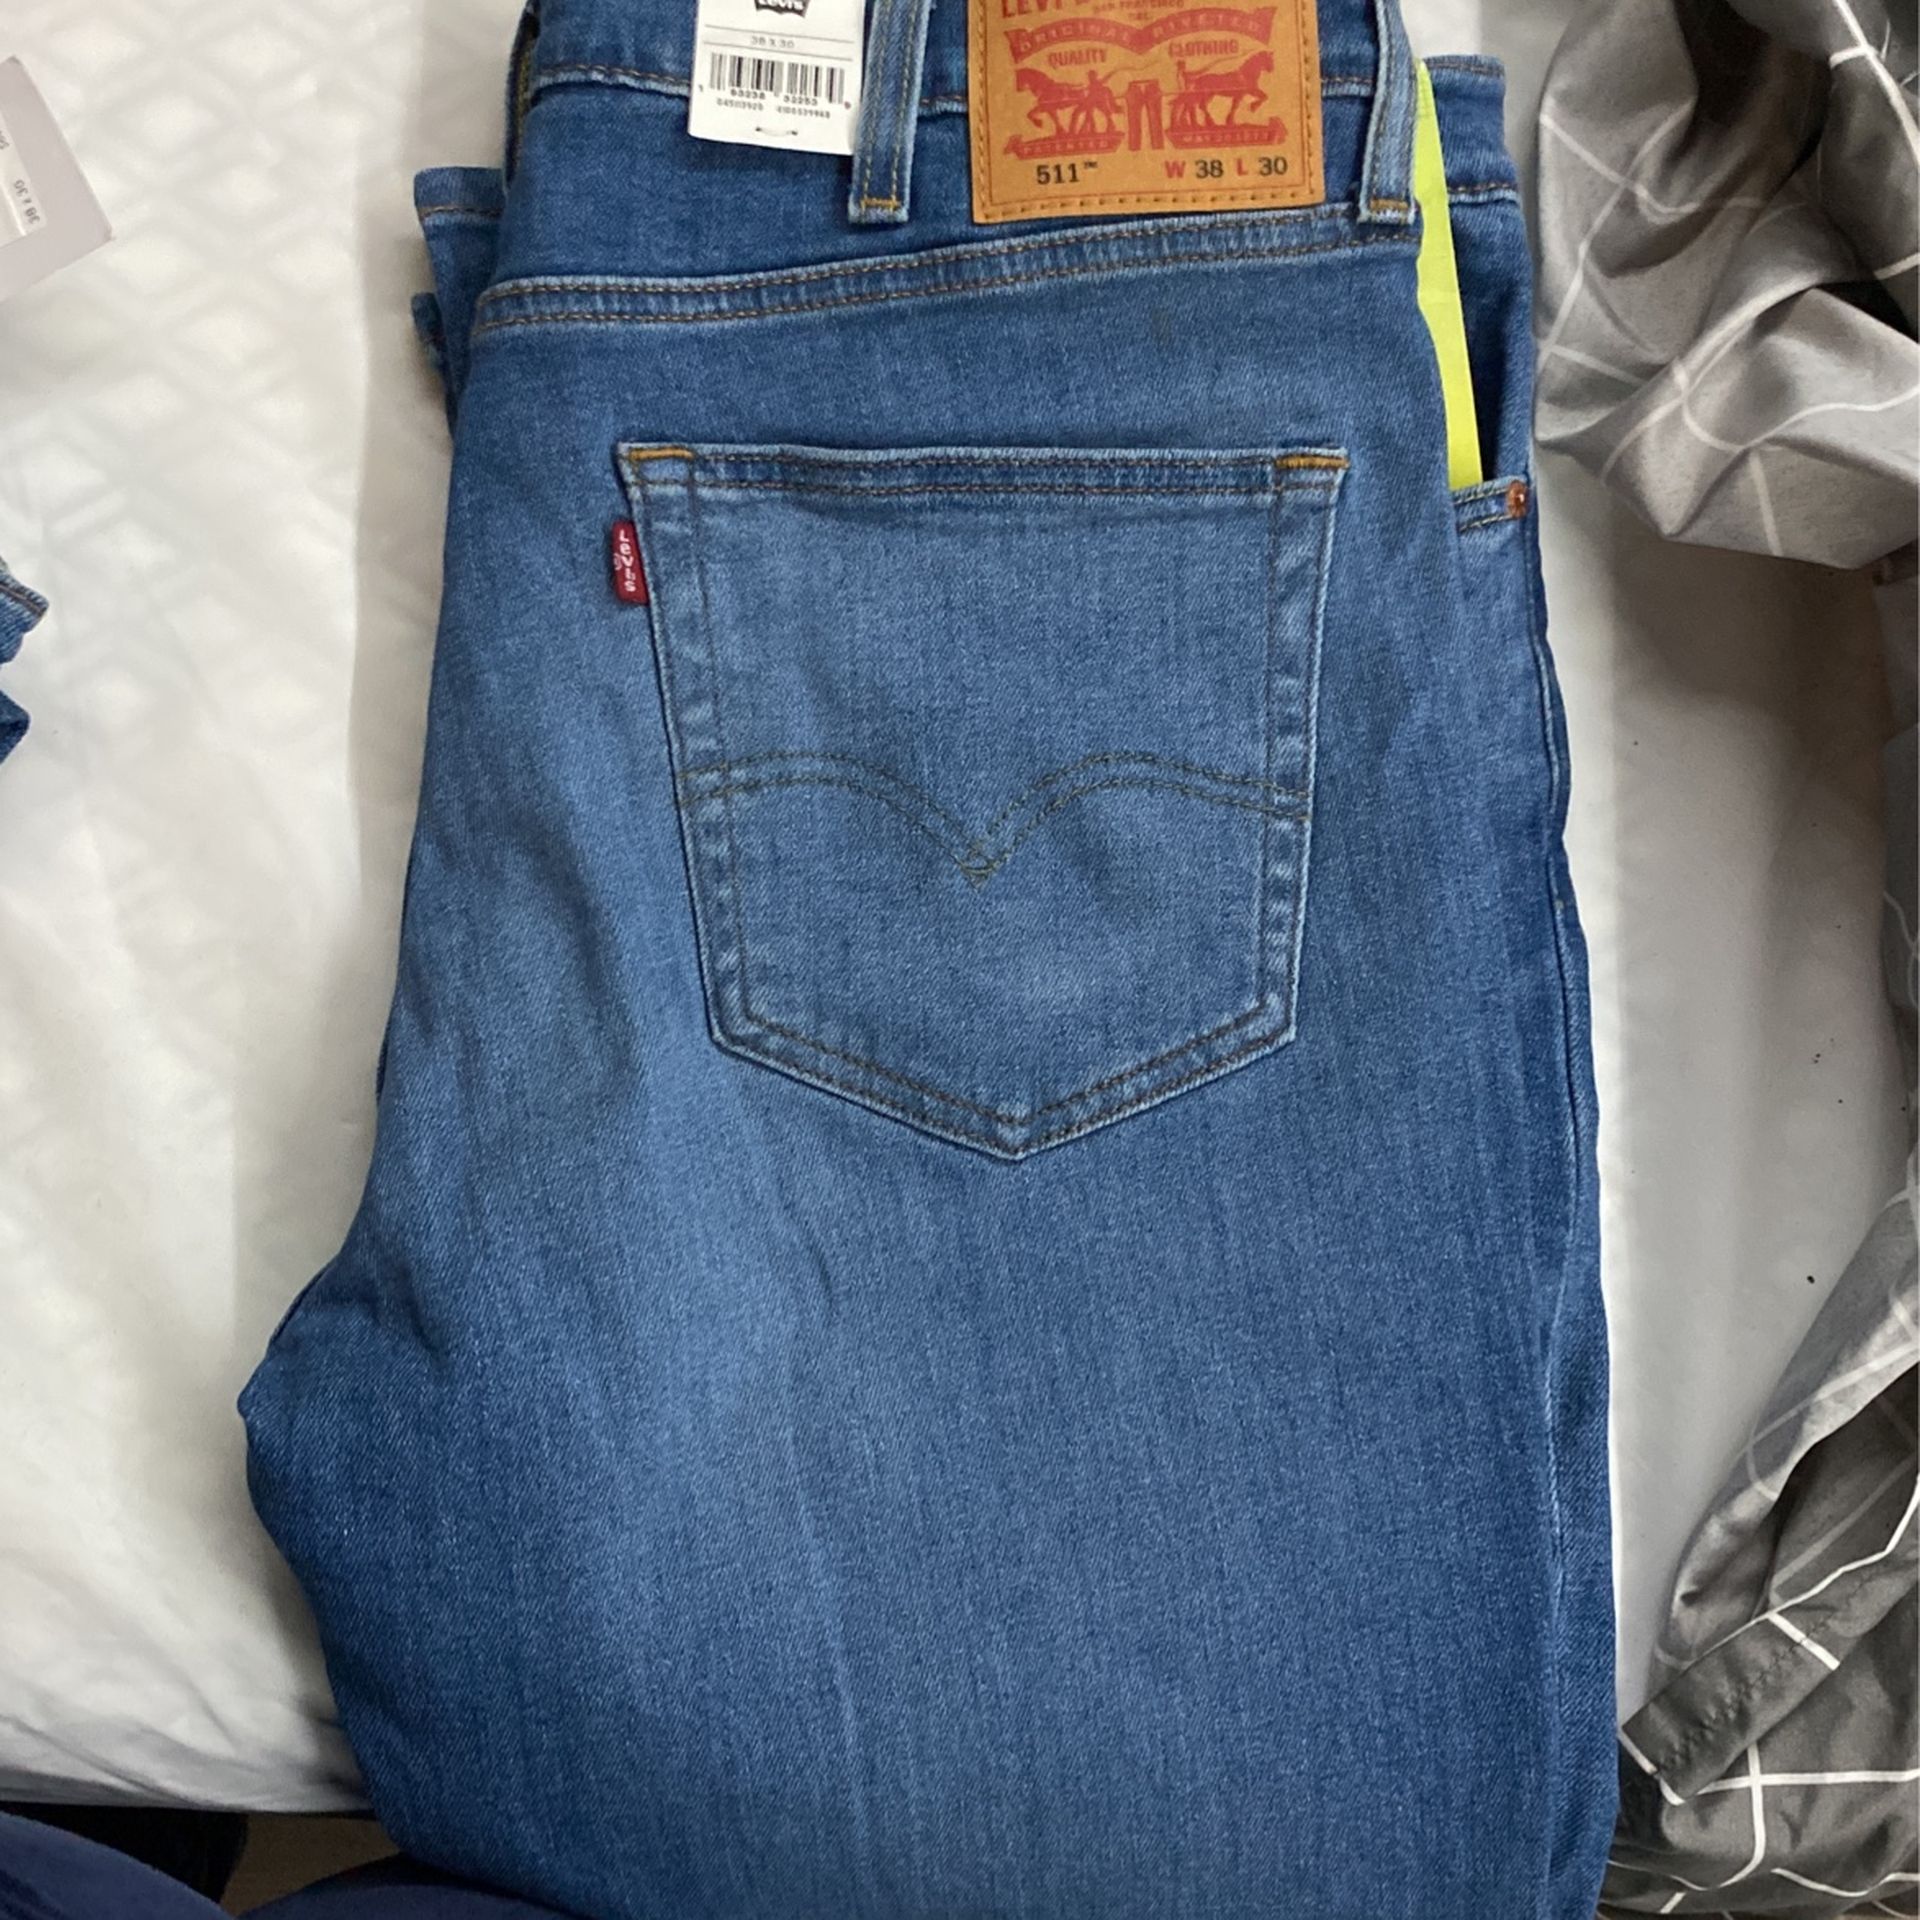 Chrome Hearts Jeans Levi’s Black Cross Leather Patch Rare Size 30 for Sale  in El Segundo, CA - OfferUp